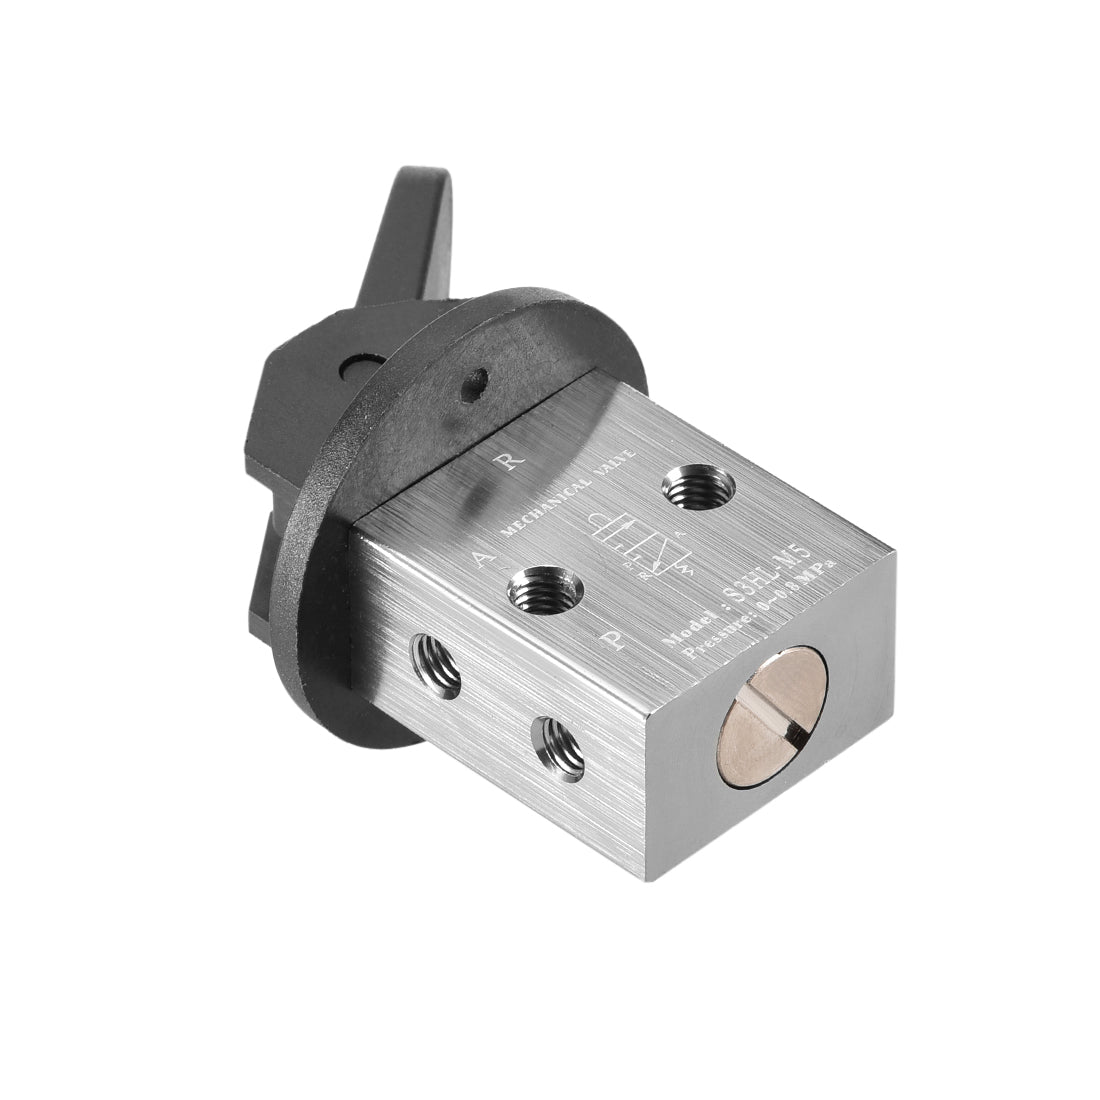 uxcell Uxcell S3HL-M5 2 Position 3 Way M5 Manual Hand Pull Pneumatic Solenoid Mechanical Valve